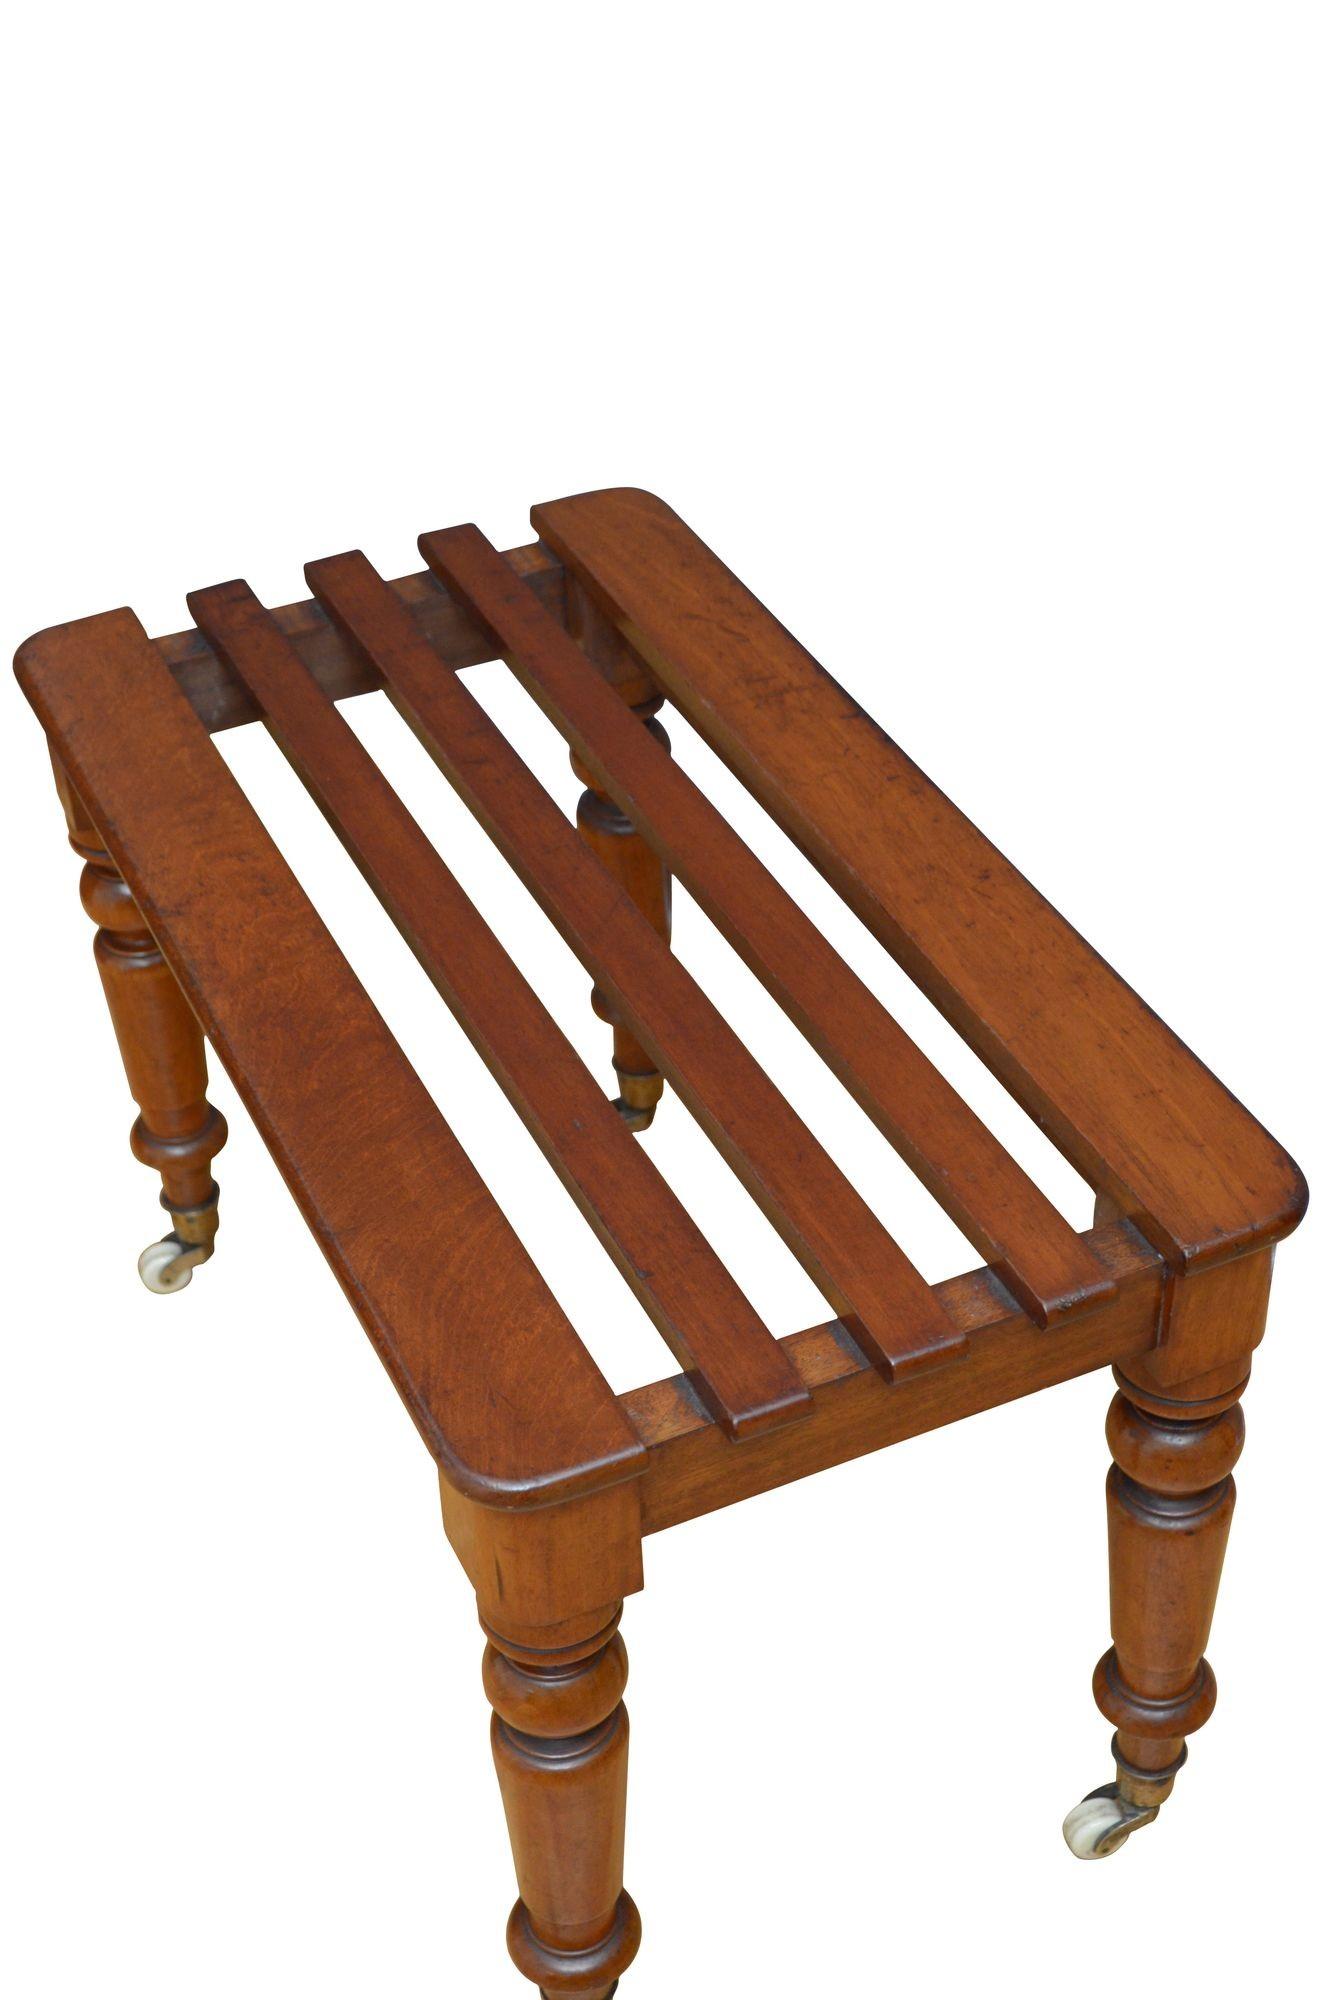 P0292 Fine quality and very unusual Victorian solid mahogany luggage rack, having slatted top and shallow frieze, all standing on four turned legs terminating in original brass cup castors with white ceramic wheels with 'the patent CB & L'. This